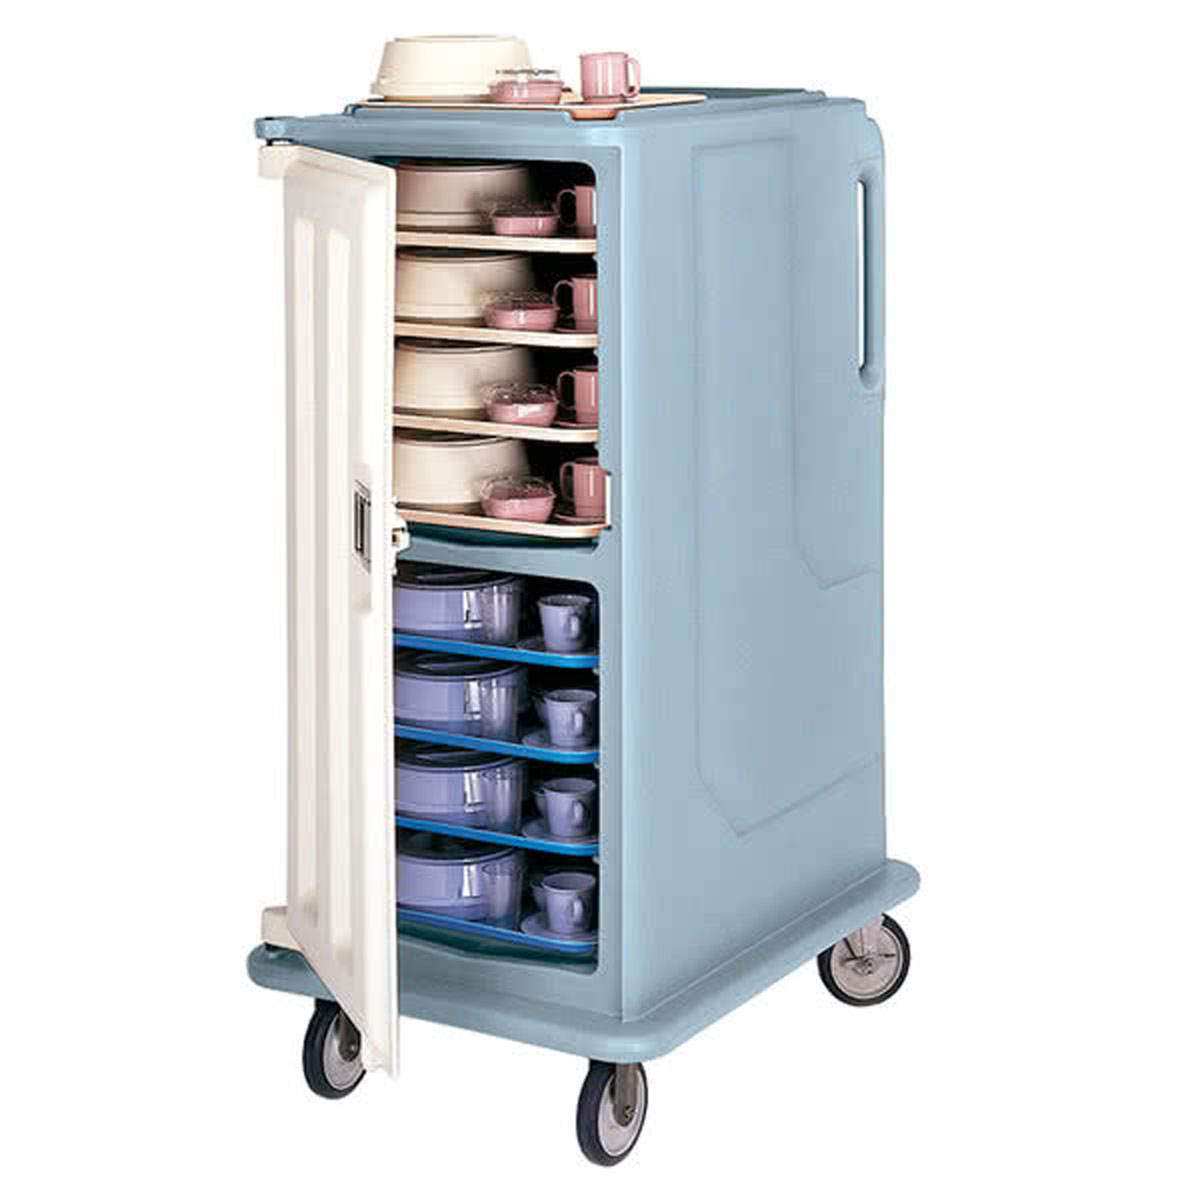 Cambro MDC1520T16401 Meal-Delivery Cart for Tray Service - 2 Compartments for 15'' x 20'' Trays - Tall - Slate Blue w/Cream Doors